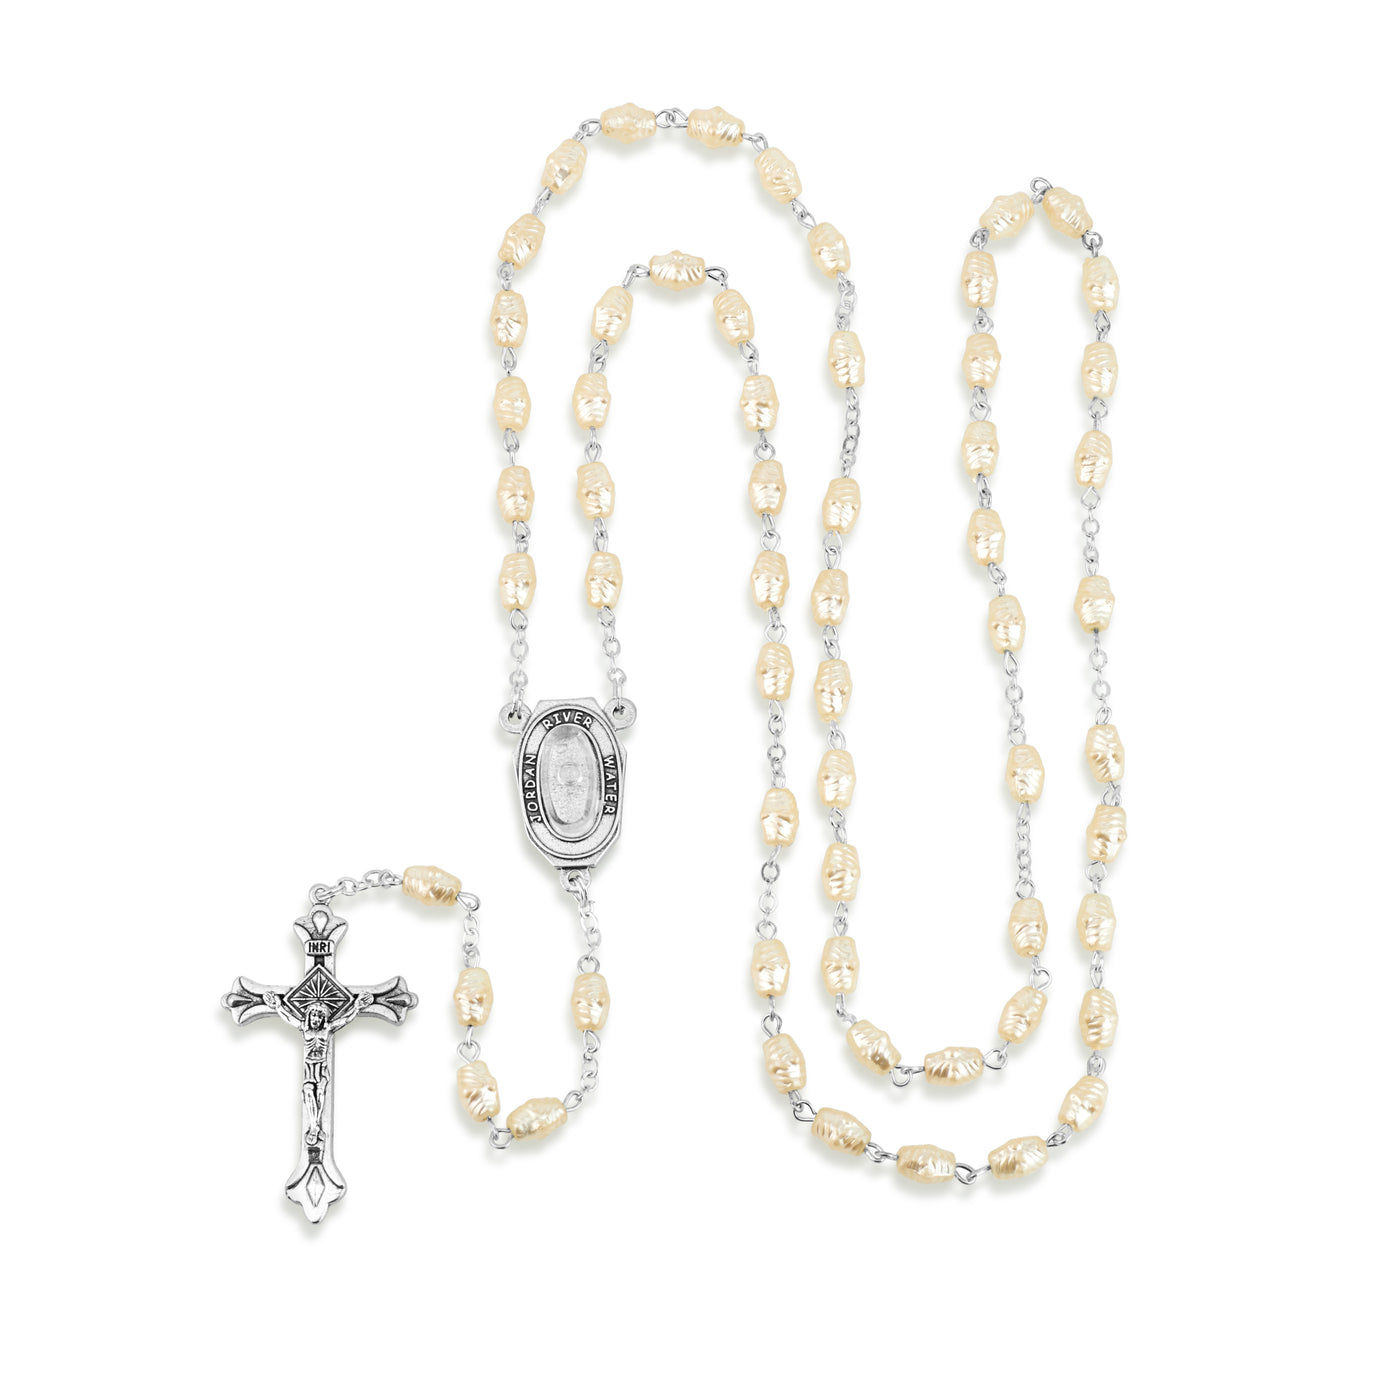 image of holy land rosary with water from the jordan river